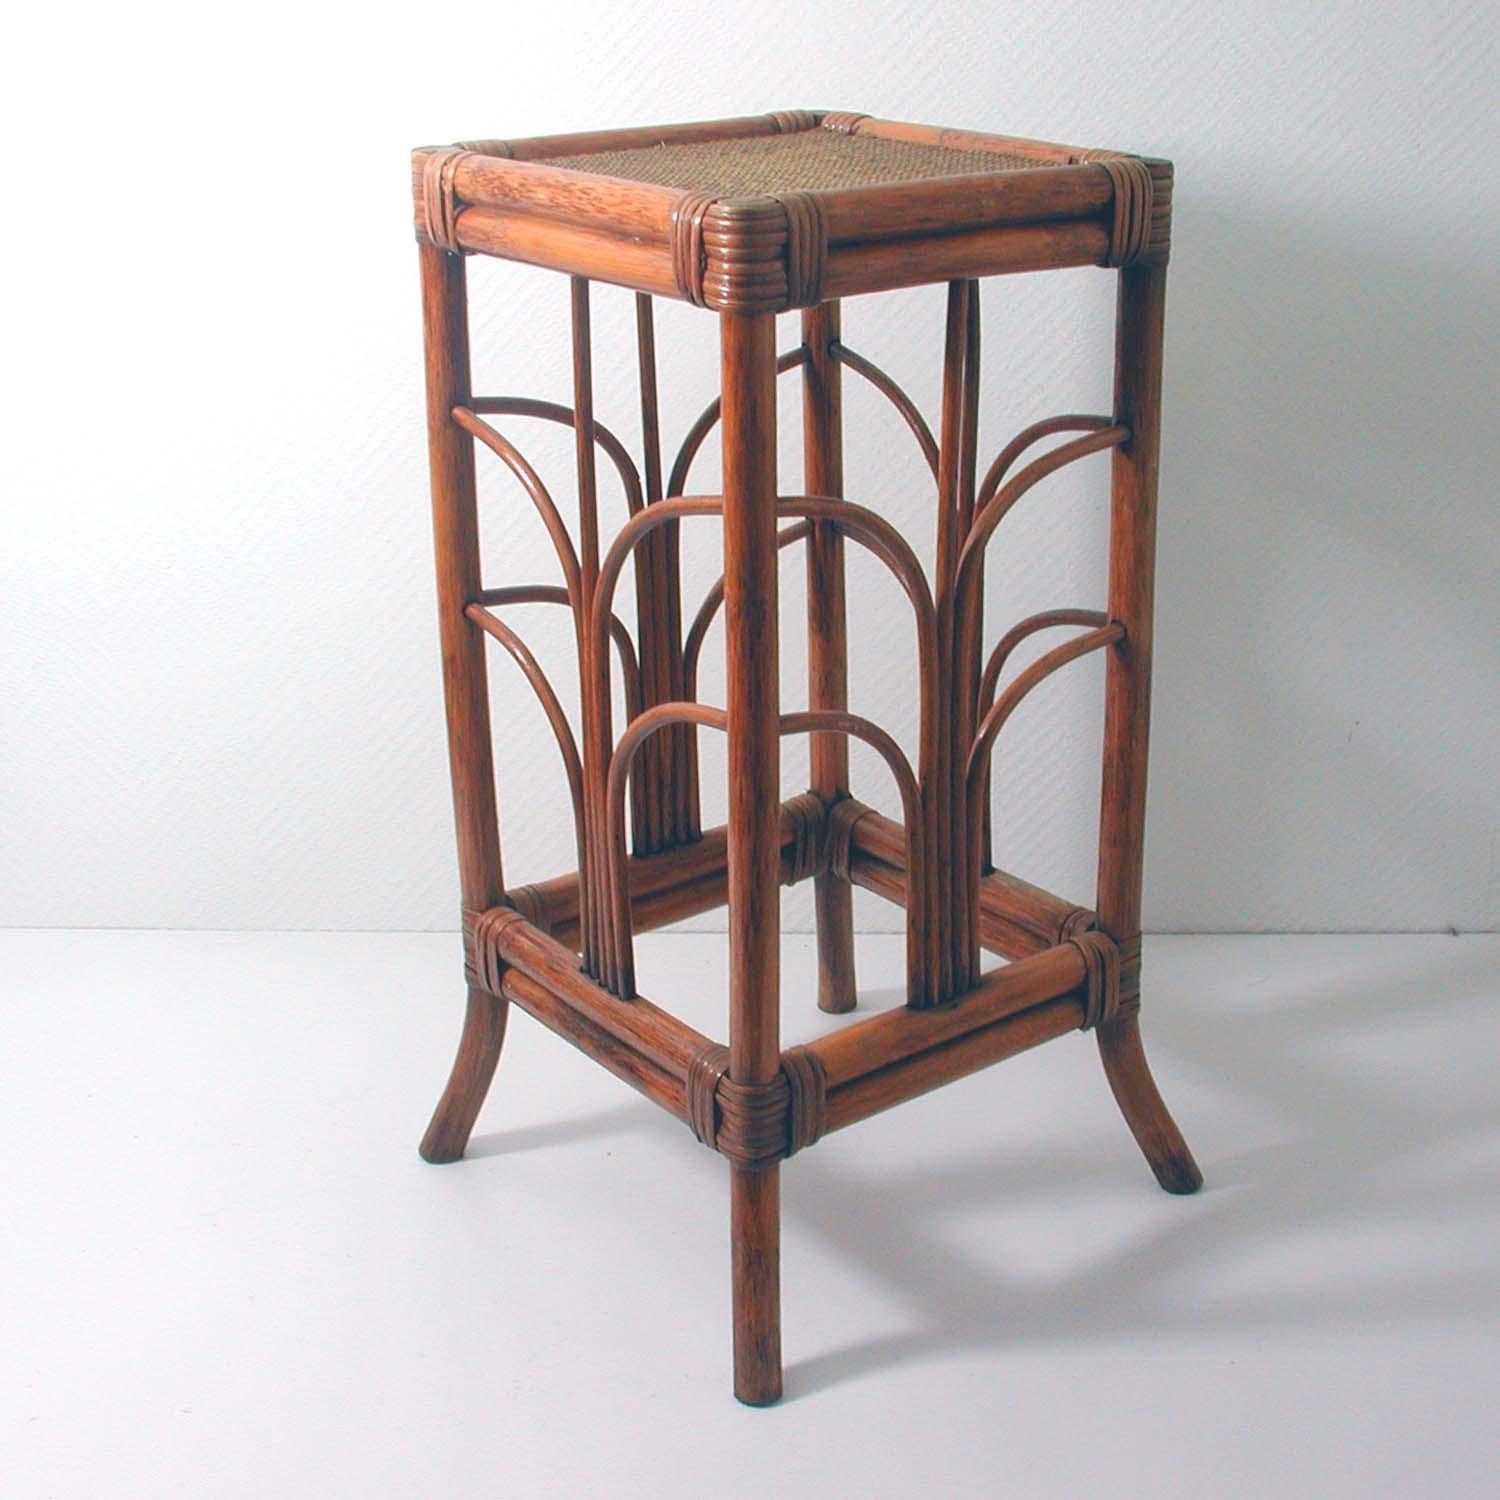 Mid-20th Century French Midcentury Art Nouveau Style Bamboo Nesting Tables Side End Tables, 1950s